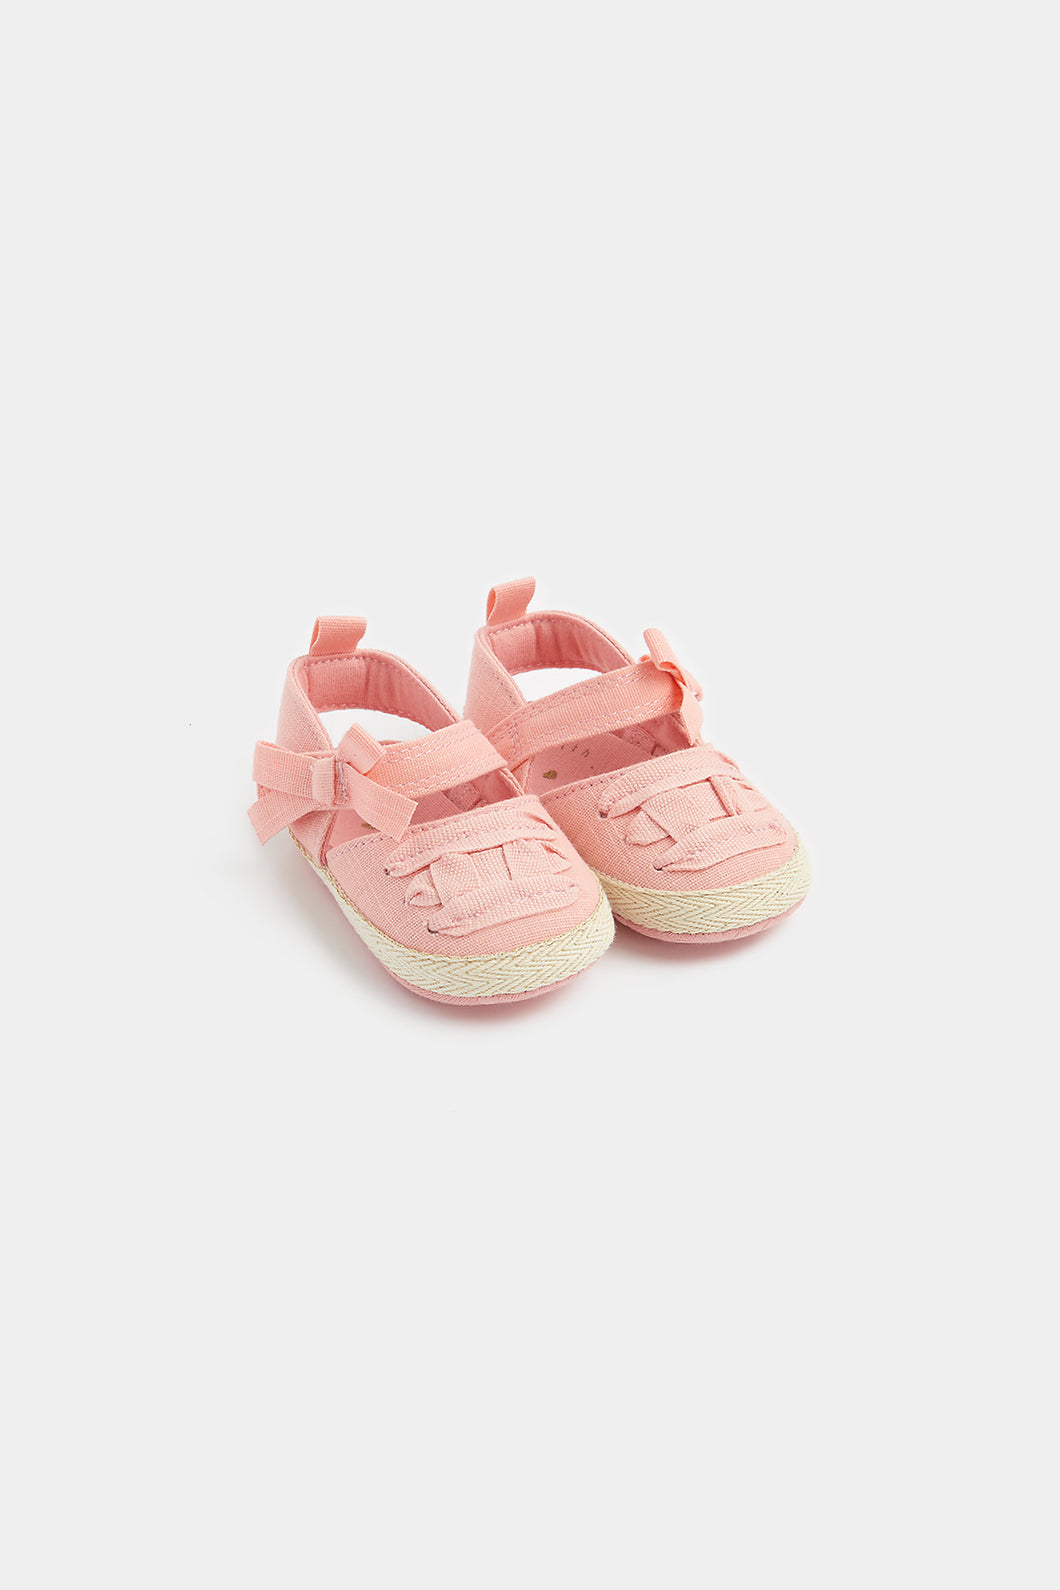 Mothercare Pink Bow Pram Shoes